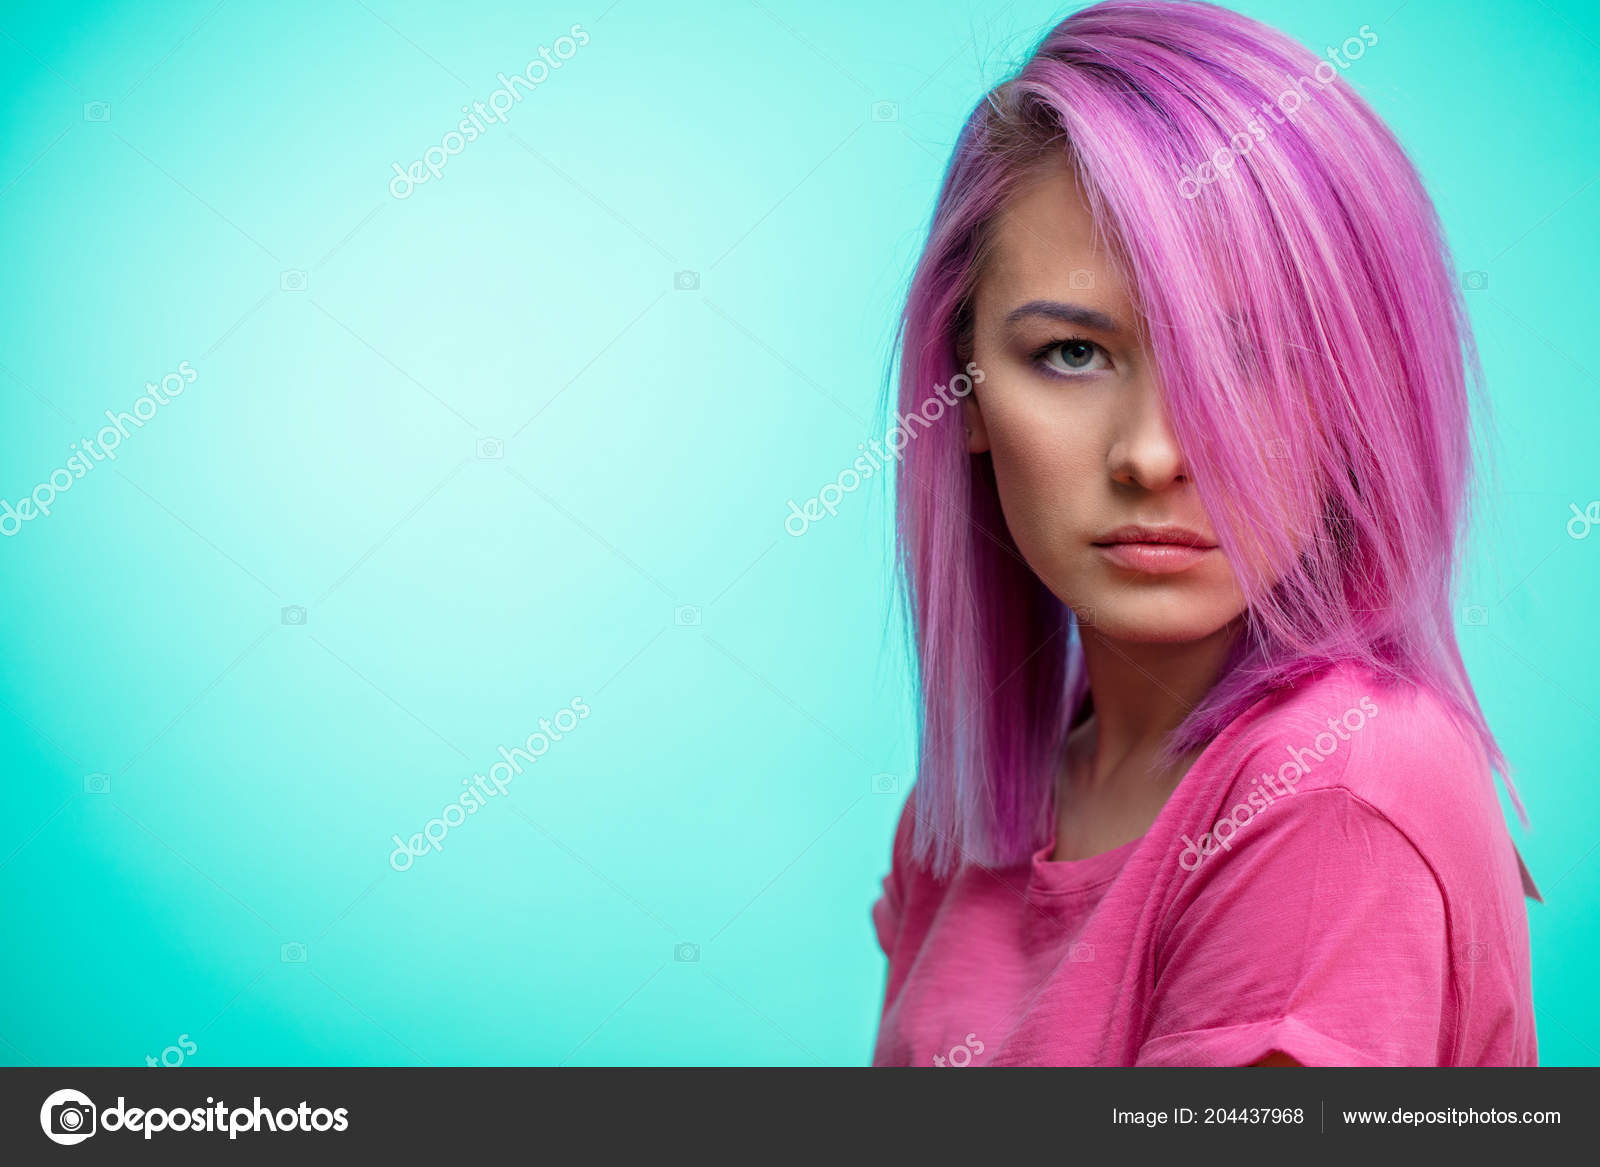 Half Pink Half Blue Hair Attractive Girl With Pink Hair Dressed In Casual Pink Cloth On Blue Background Stock Photo C Ufabizphoto